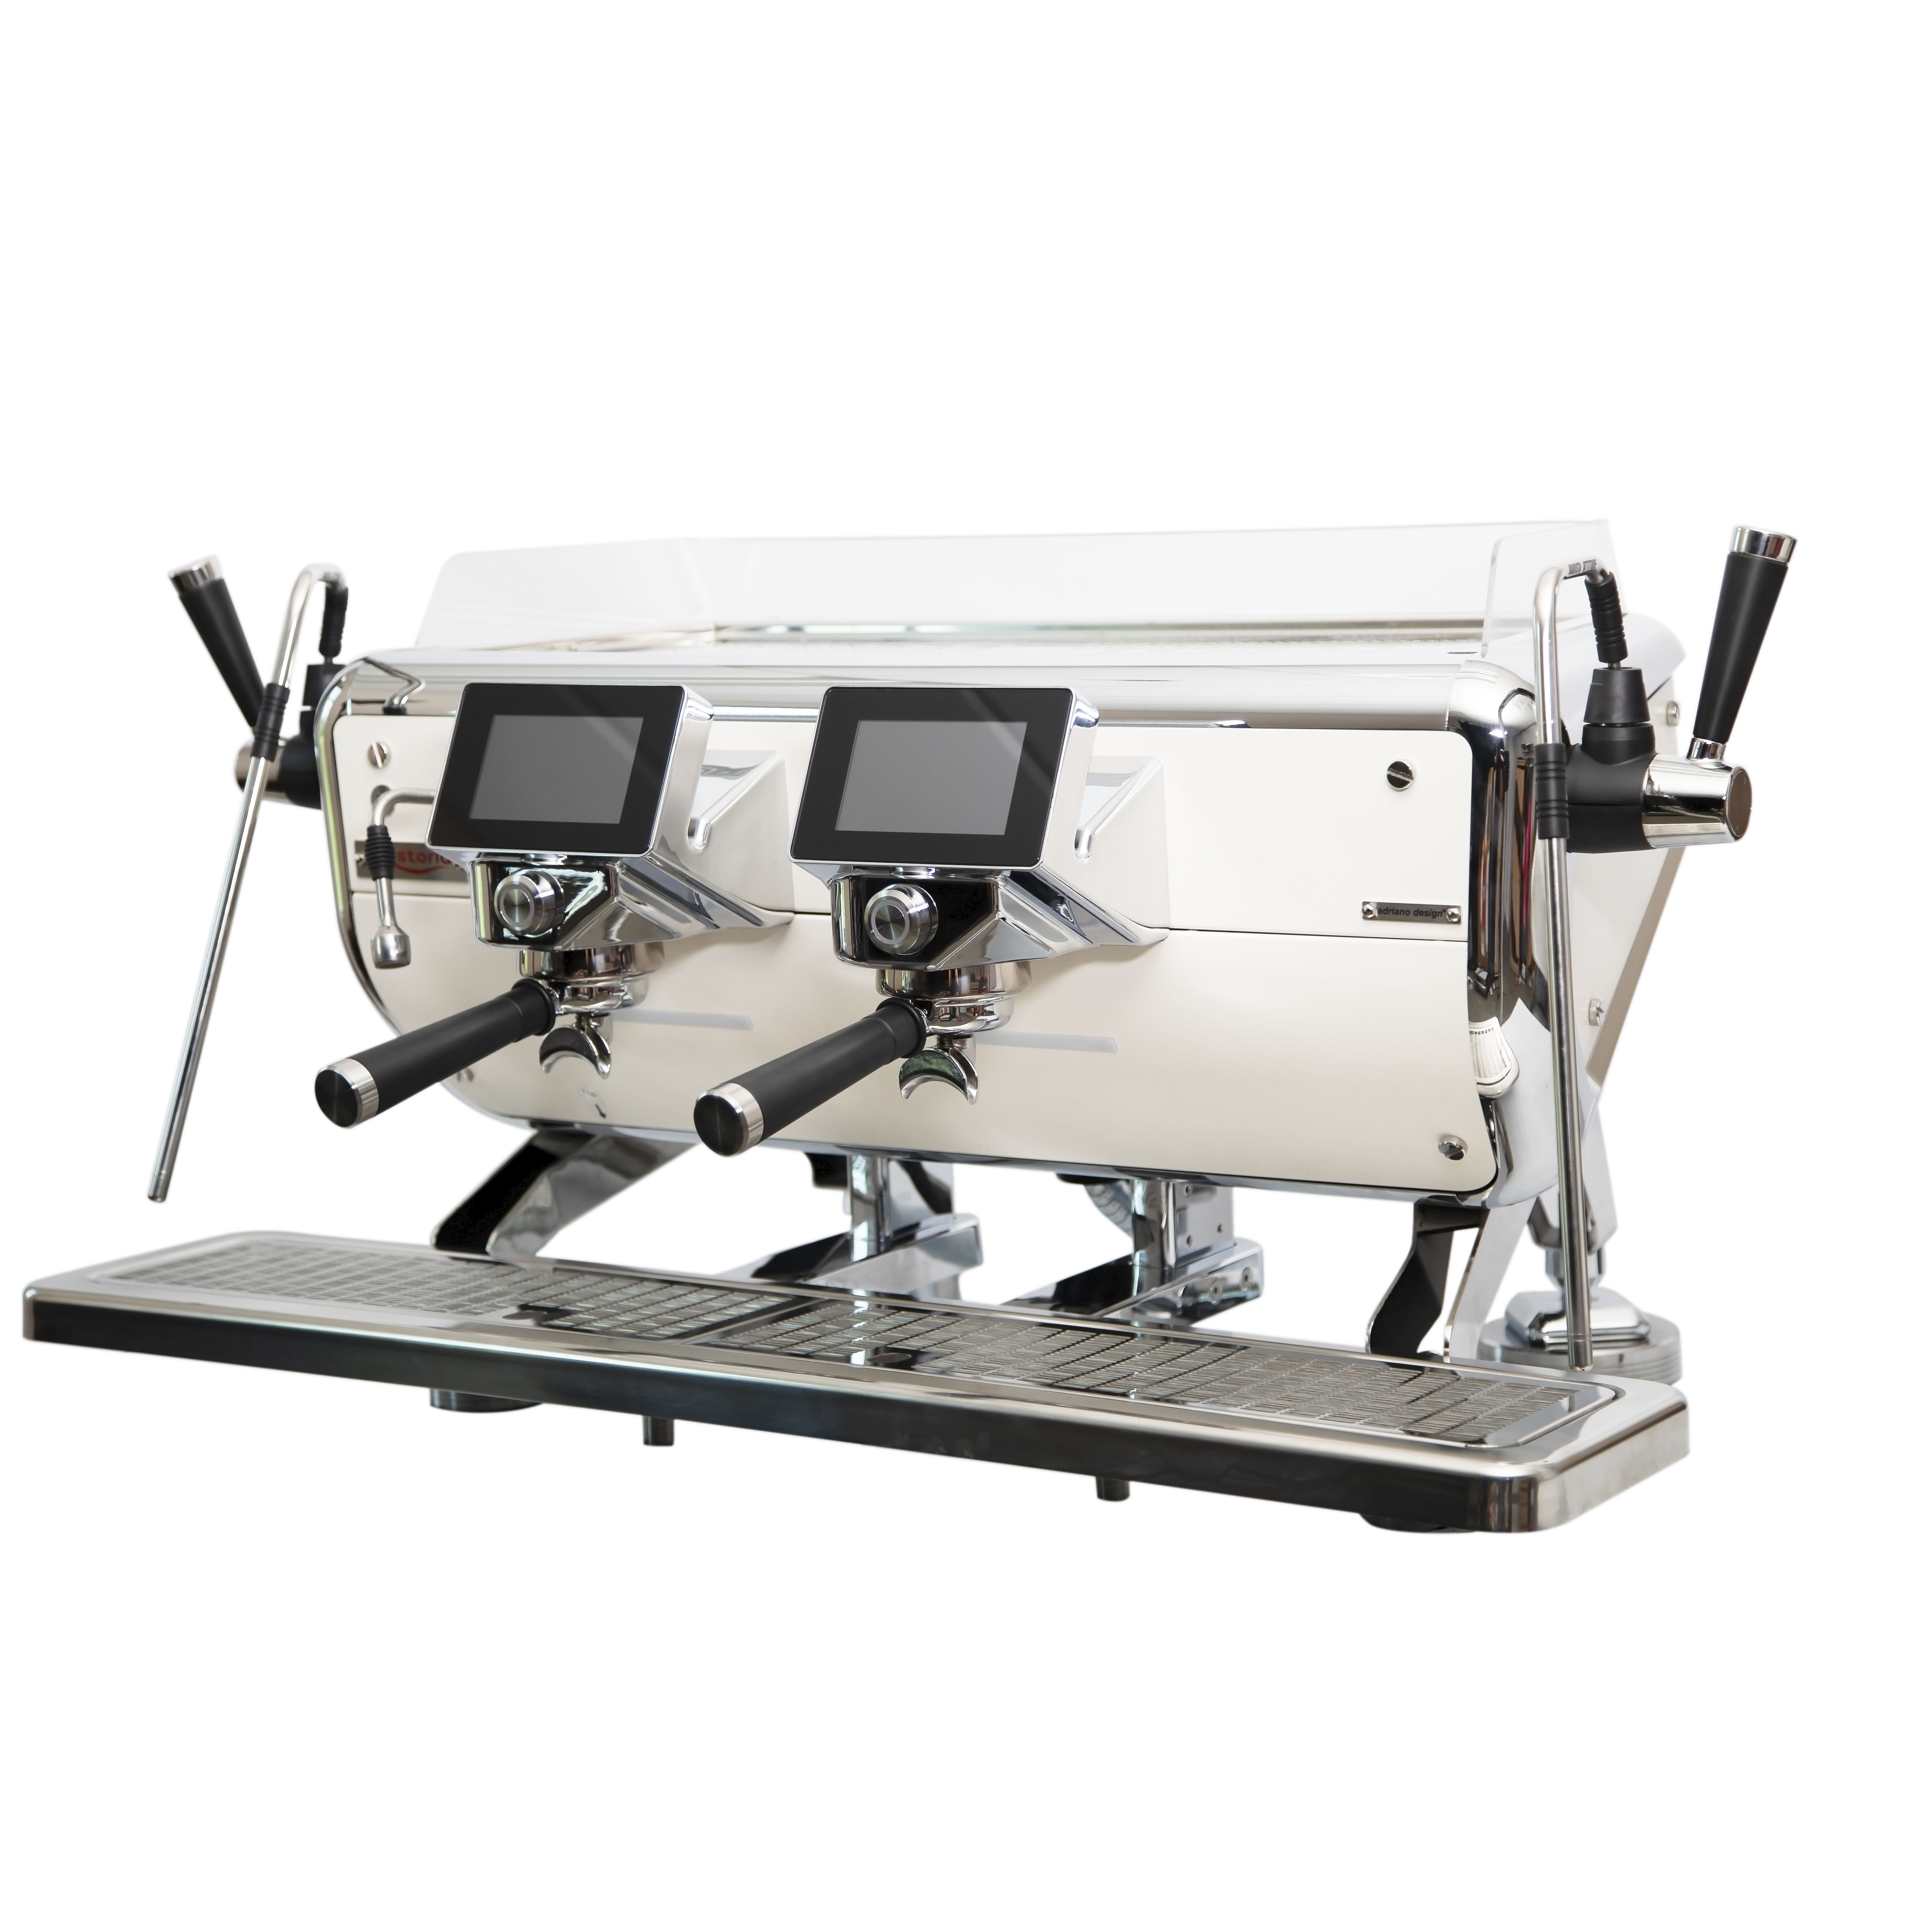 Stainless Steel Coffee Machines For Cafes, Model Name/Number: Astoria